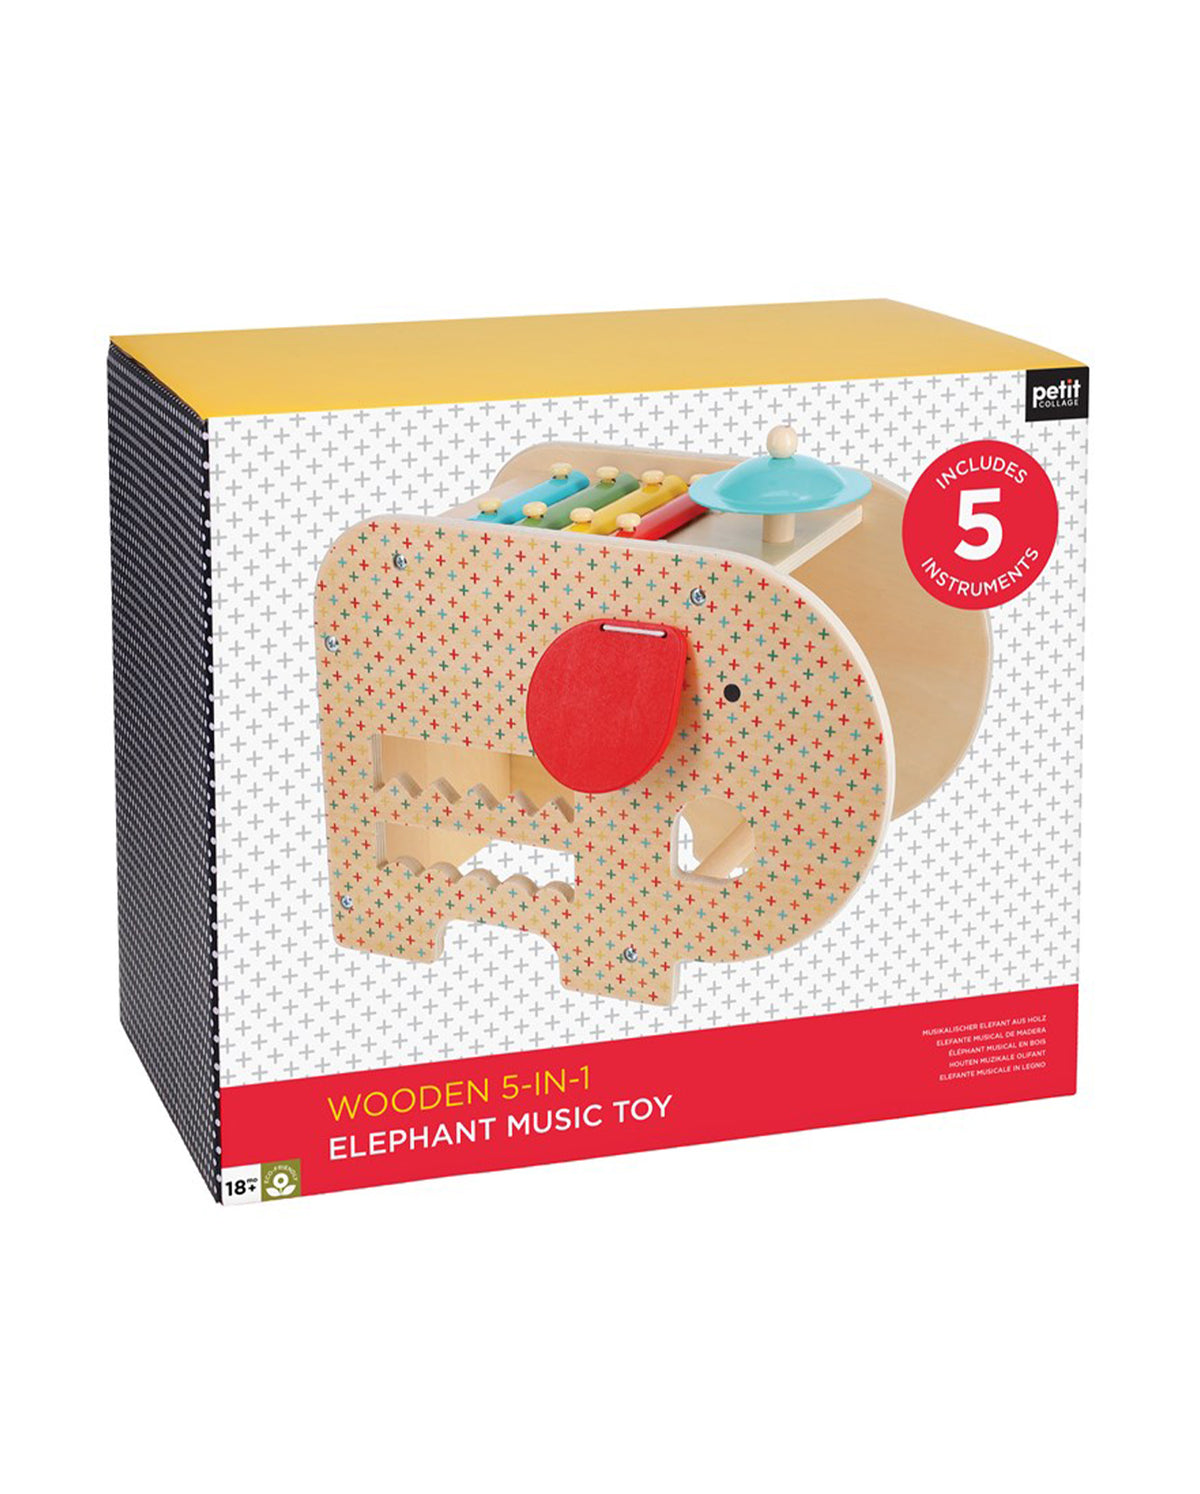 Wooden 5-In-1 Elephant Music Toy